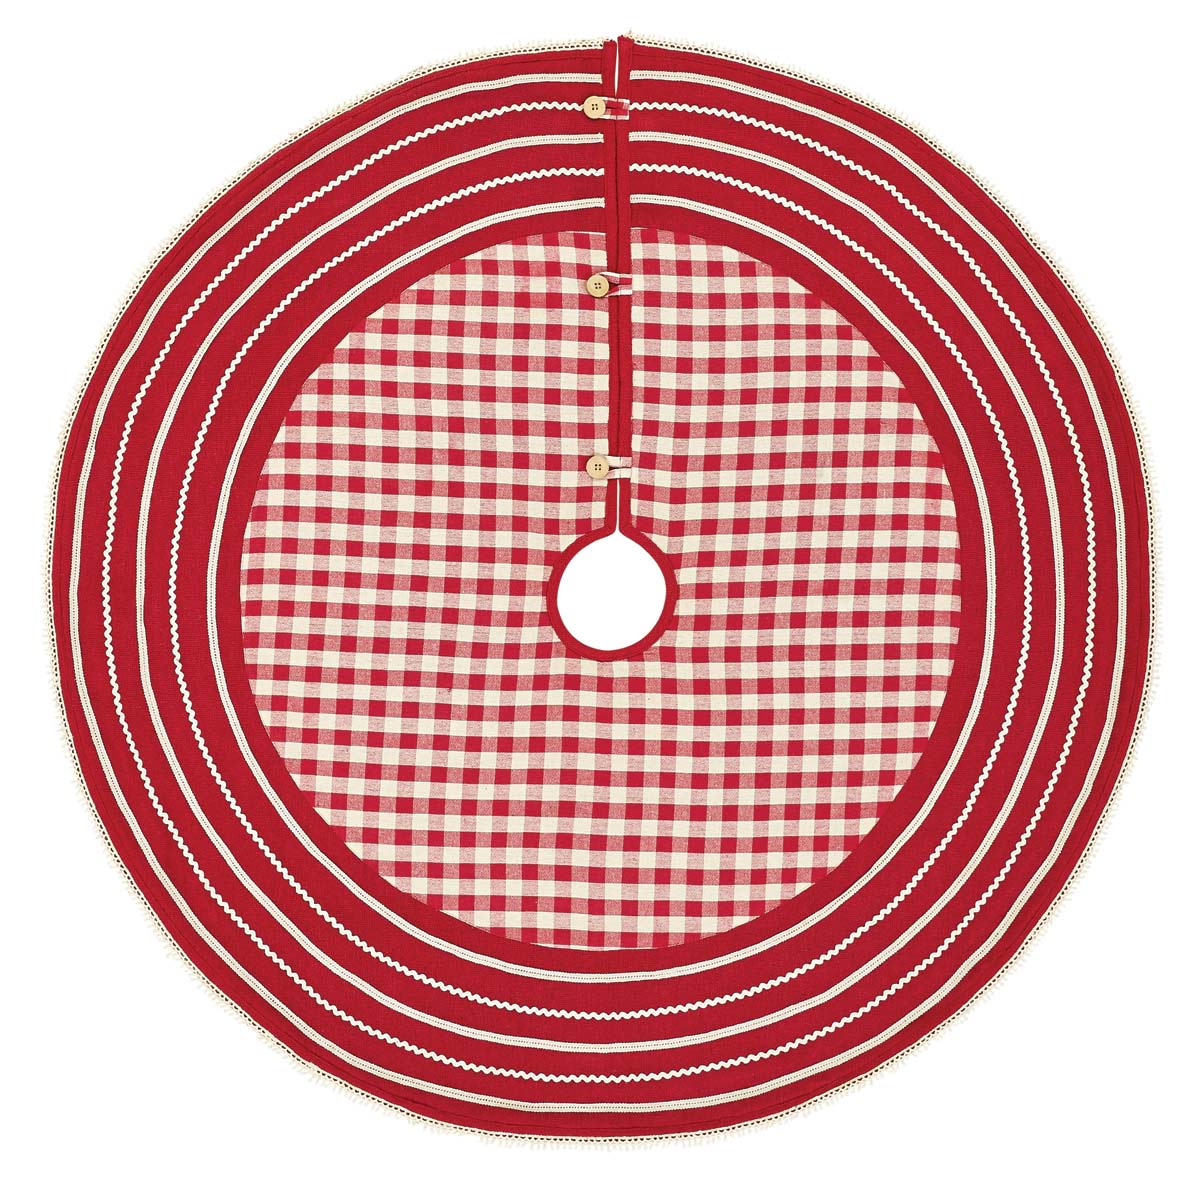 Gretchen Red and White Gingham 48" Christmas Tree Skirt